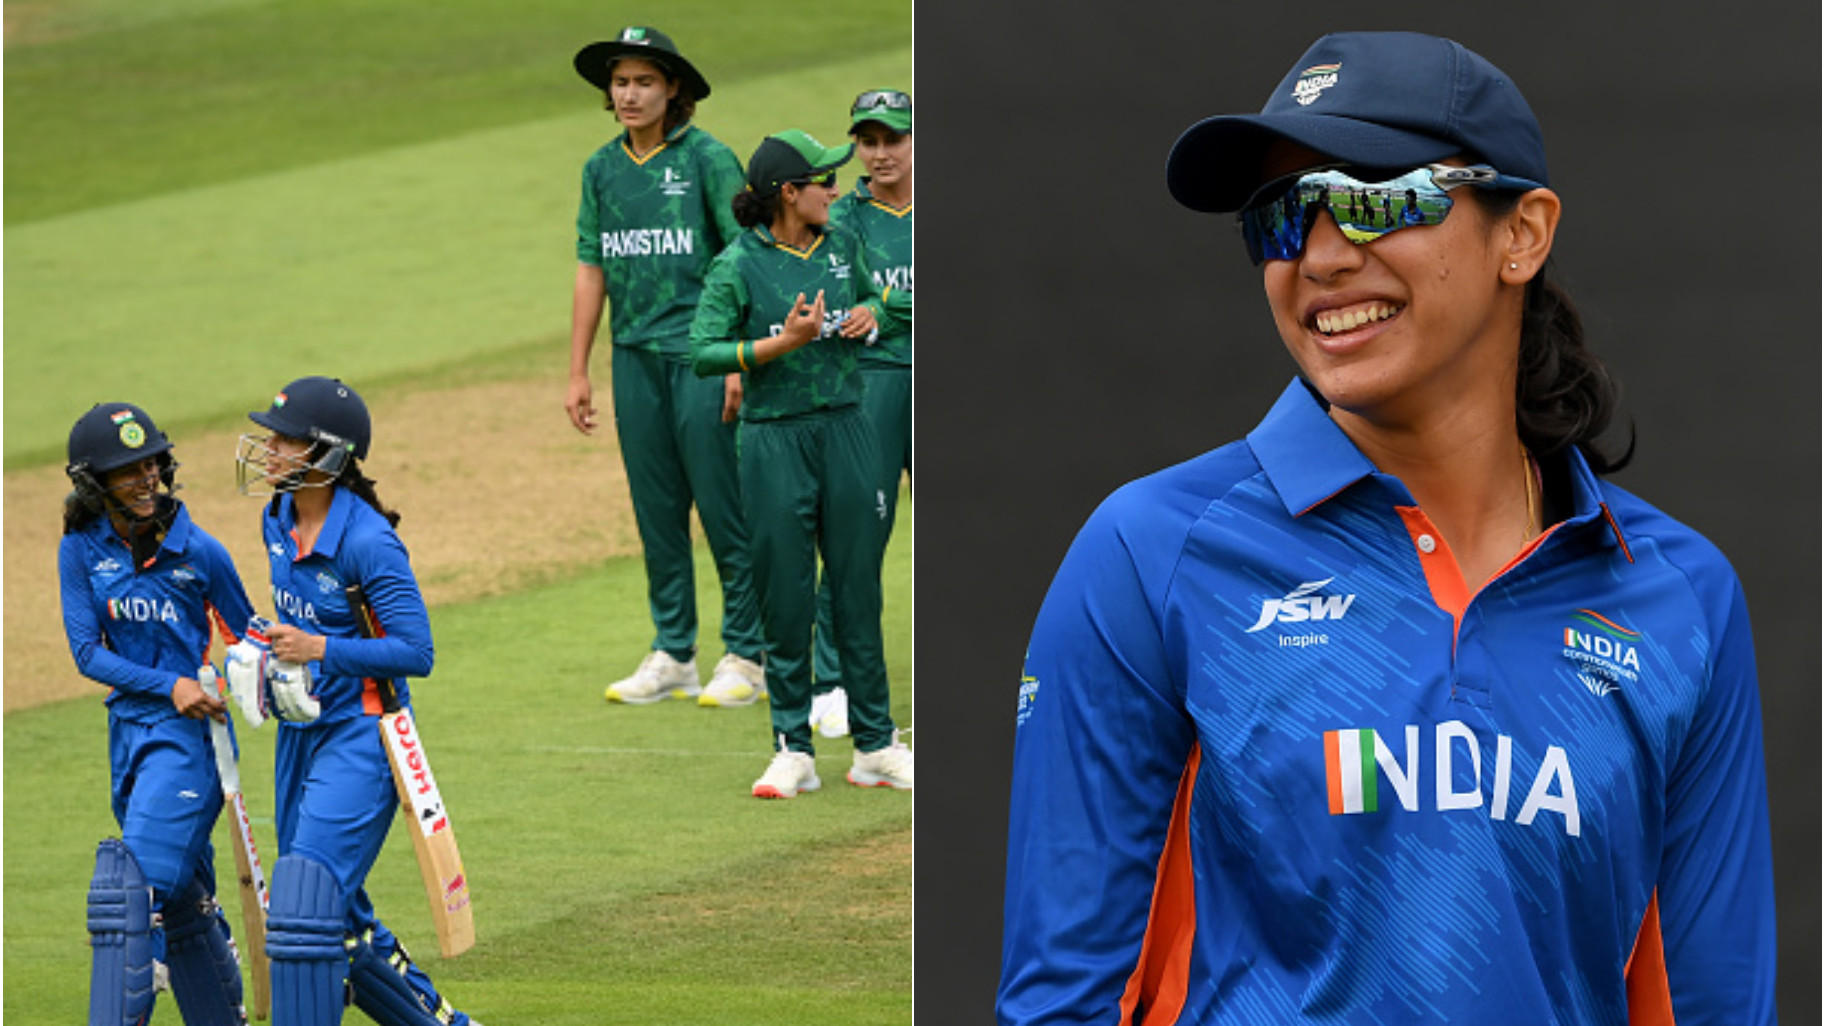 CWG 2022: “We looked at it as a very important match,” says Smriti Mandhana after win over Pakistan